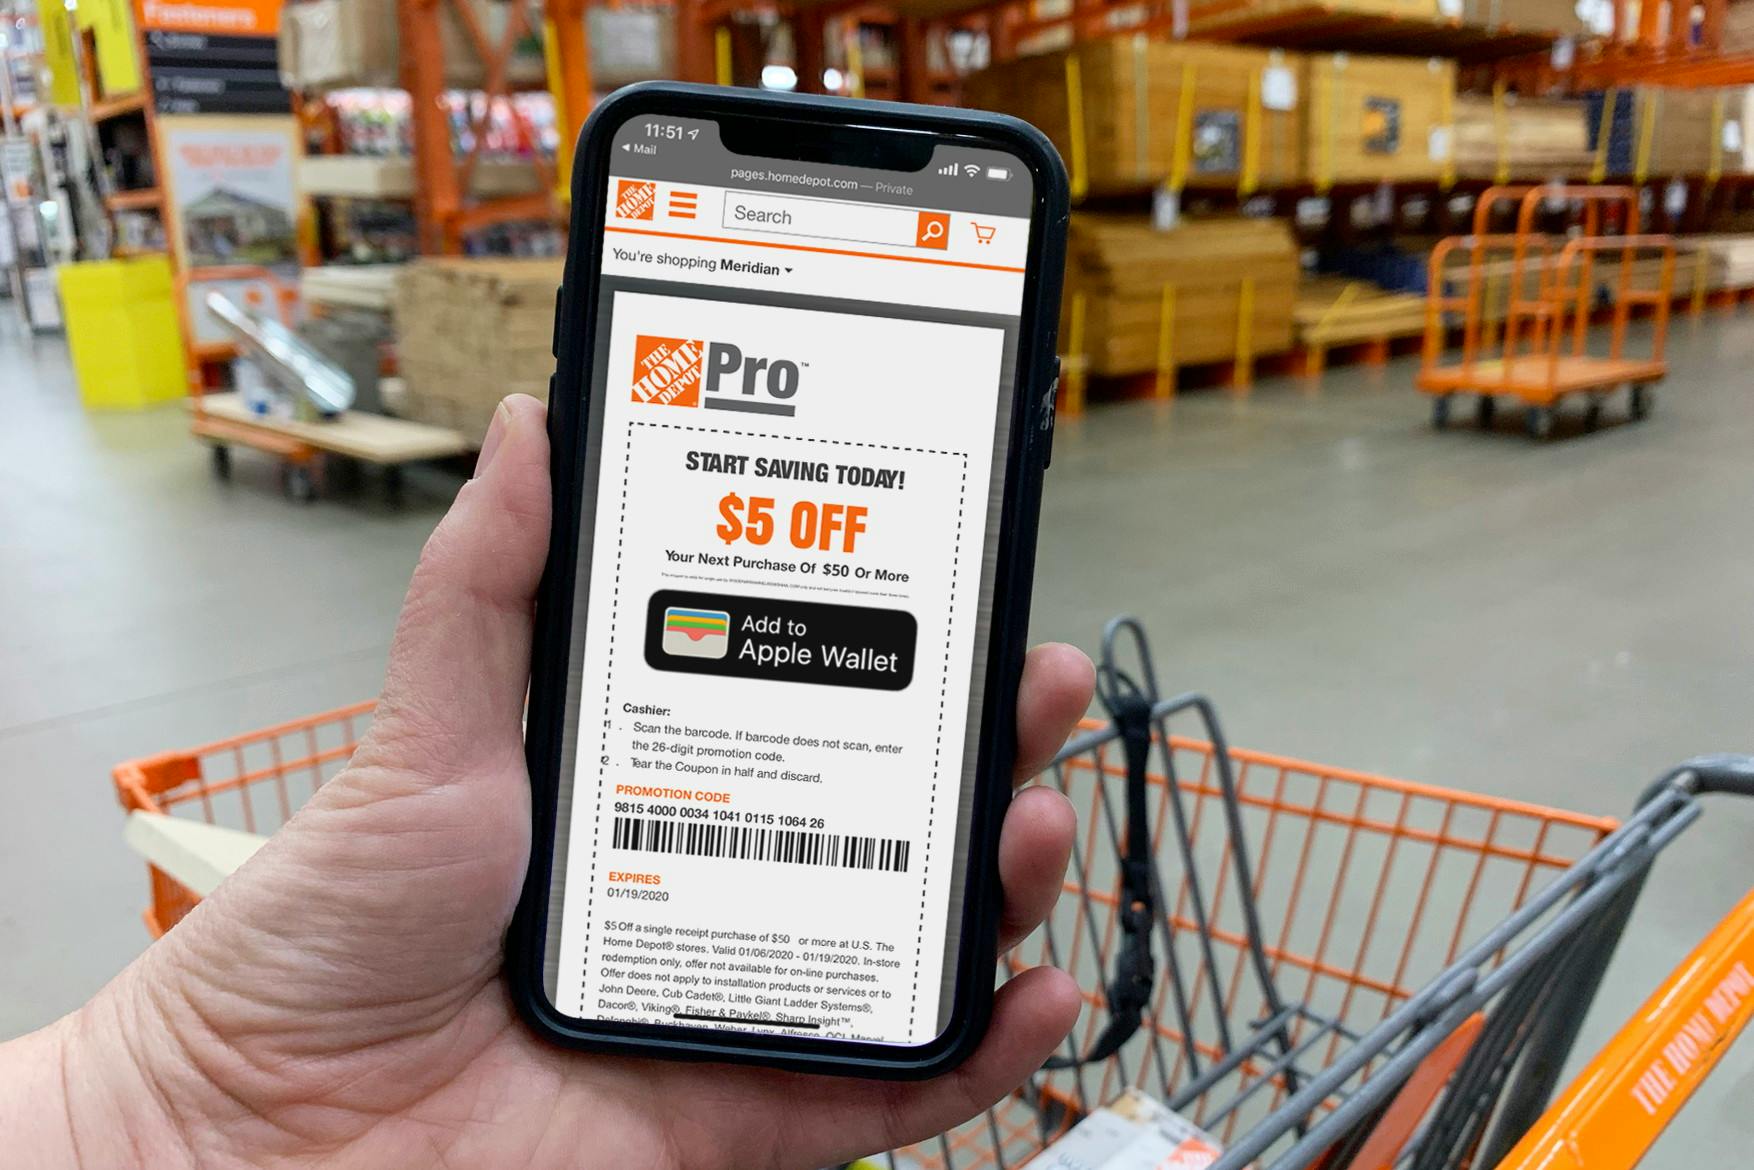 Promotional Code For Lowes June 2020